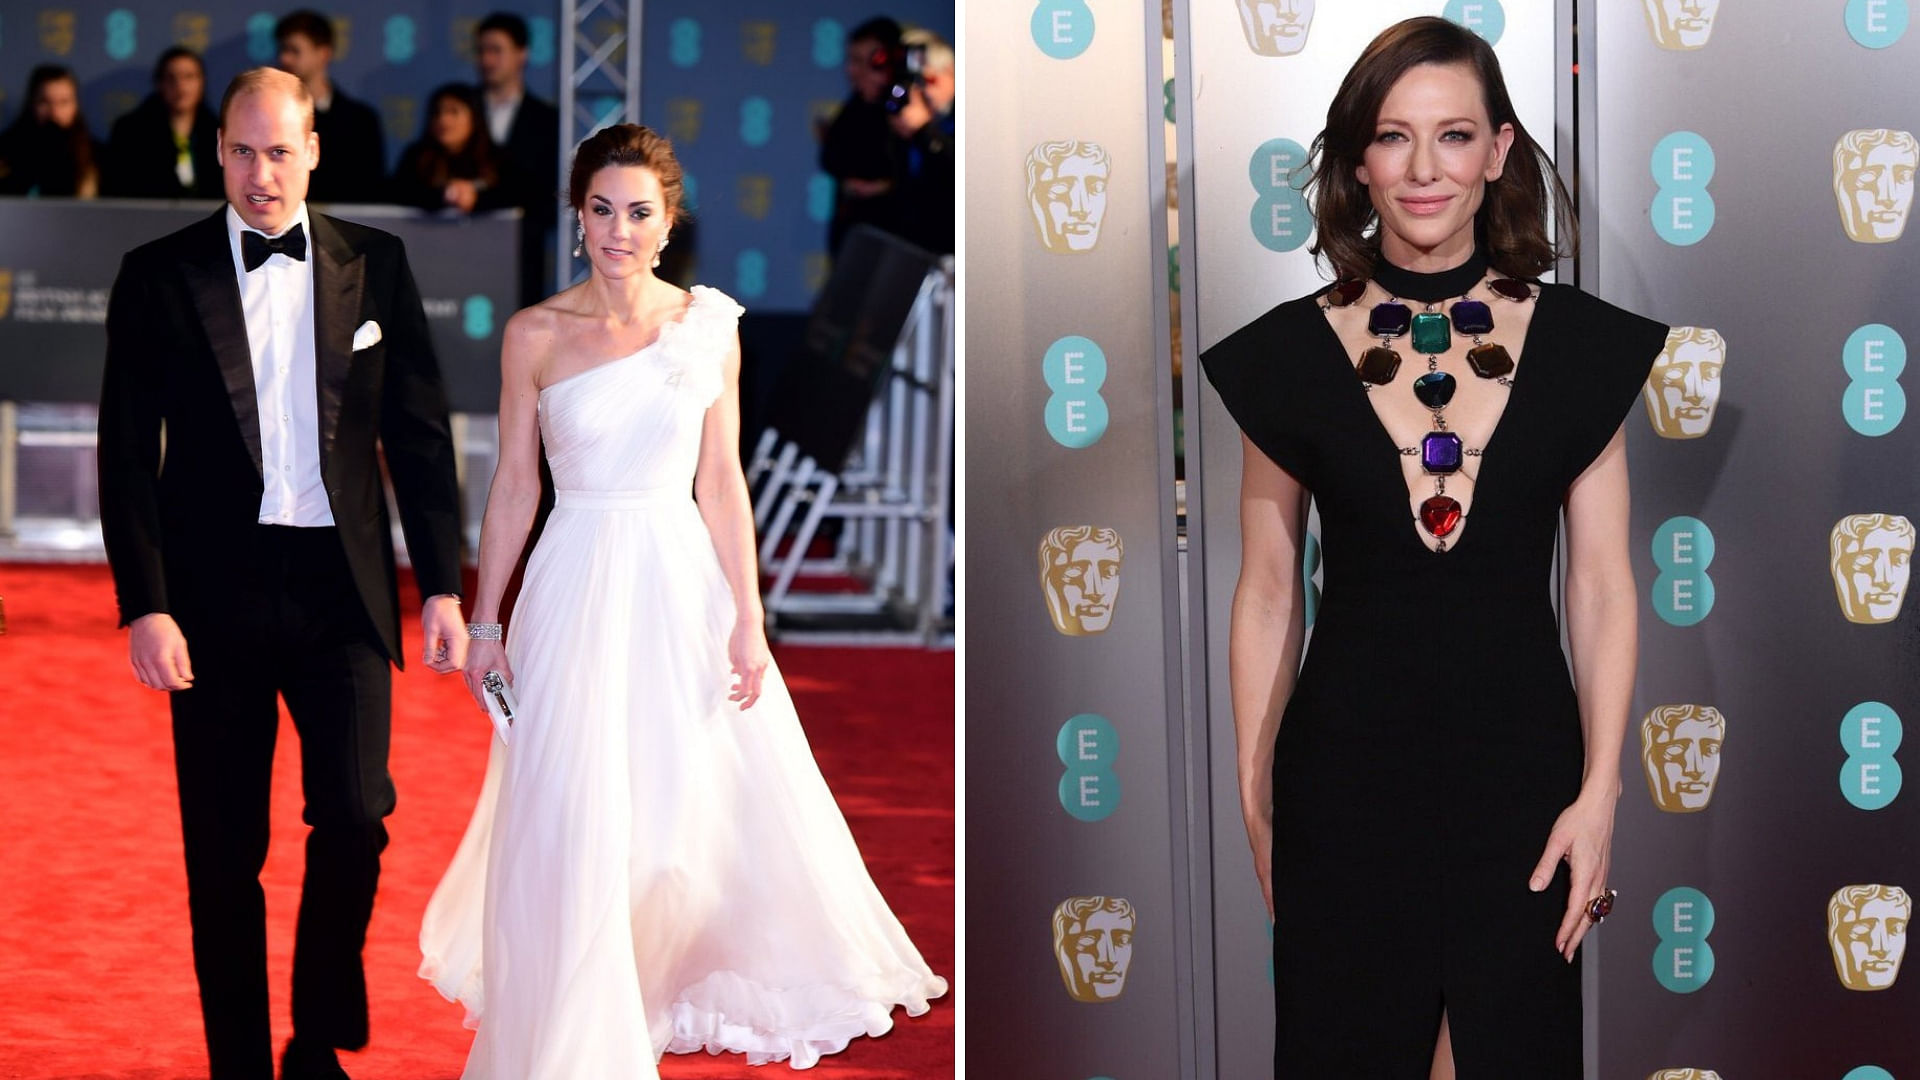 Check out all the red carpet looks from BAFTA.